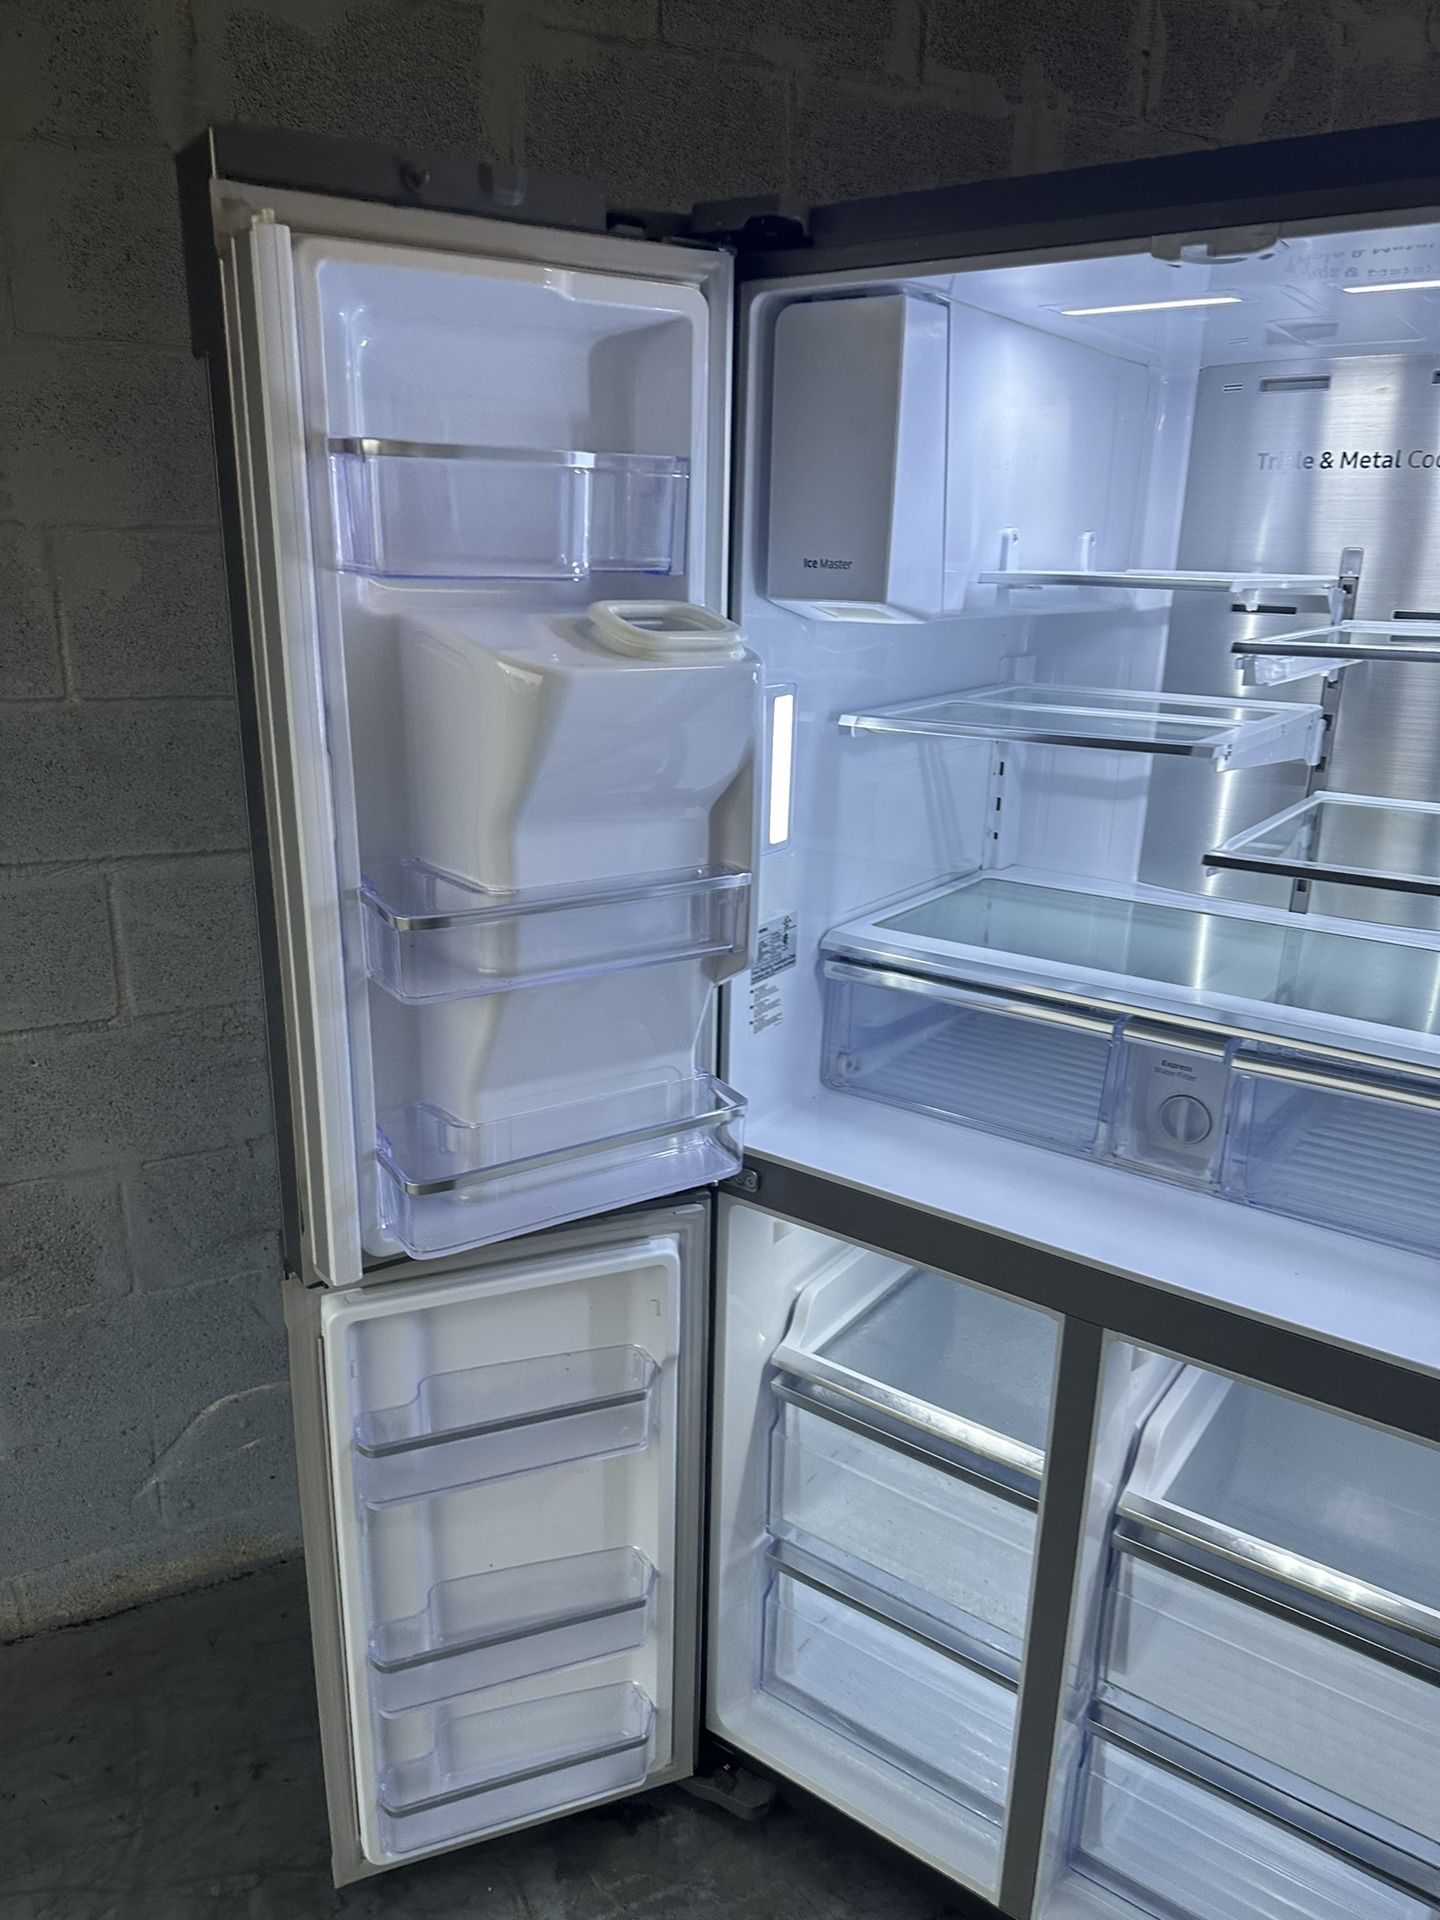 Refrigerator Samsung 4 Door, 36x33x68.5, Warranty 3 Months,, Delivery  Available for Sale in Hialeah, FL - OfferUp